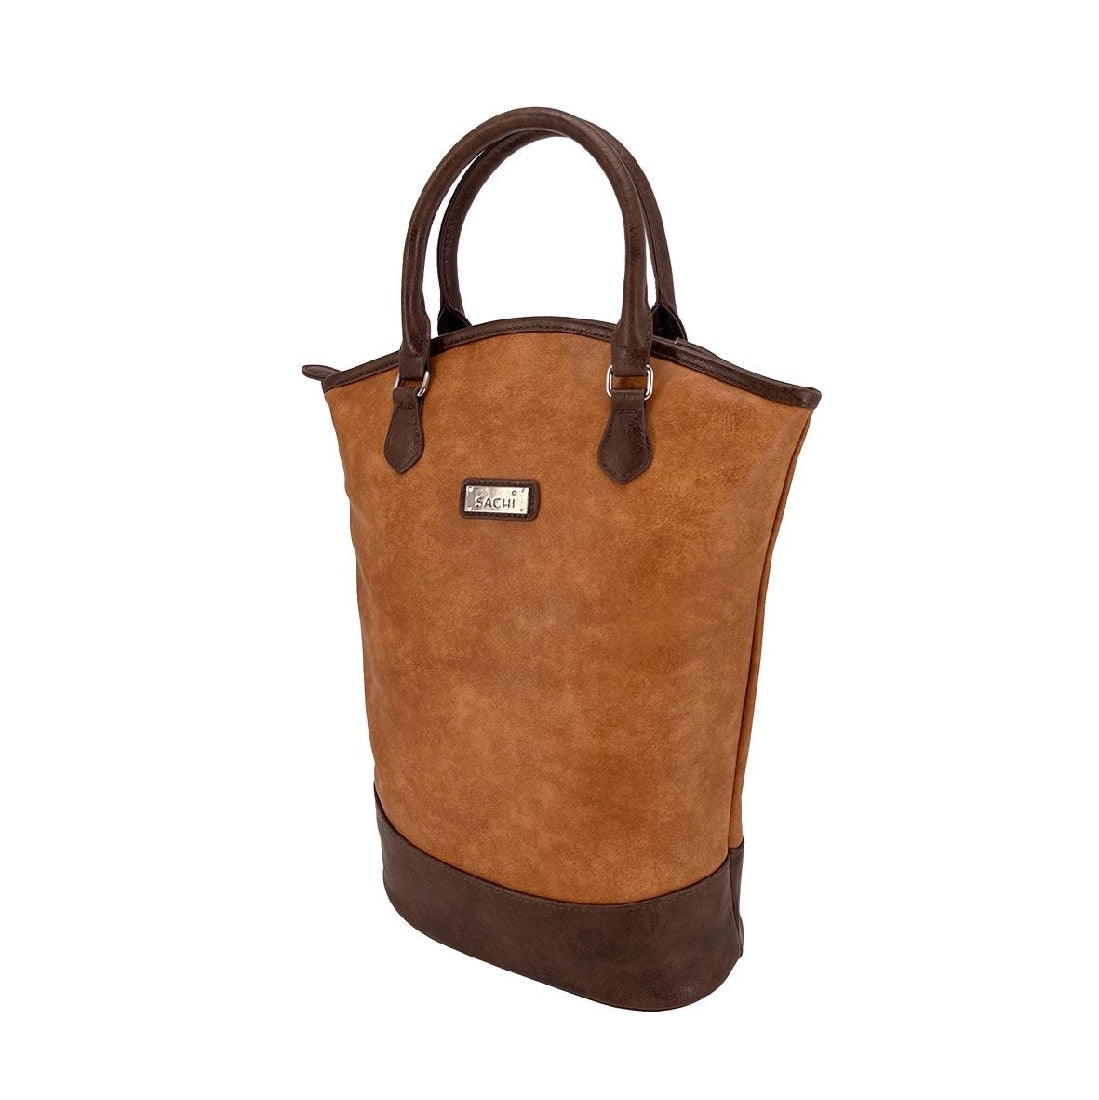 Sachi Two Bottle Wine Tote - Faux Leather - Tan